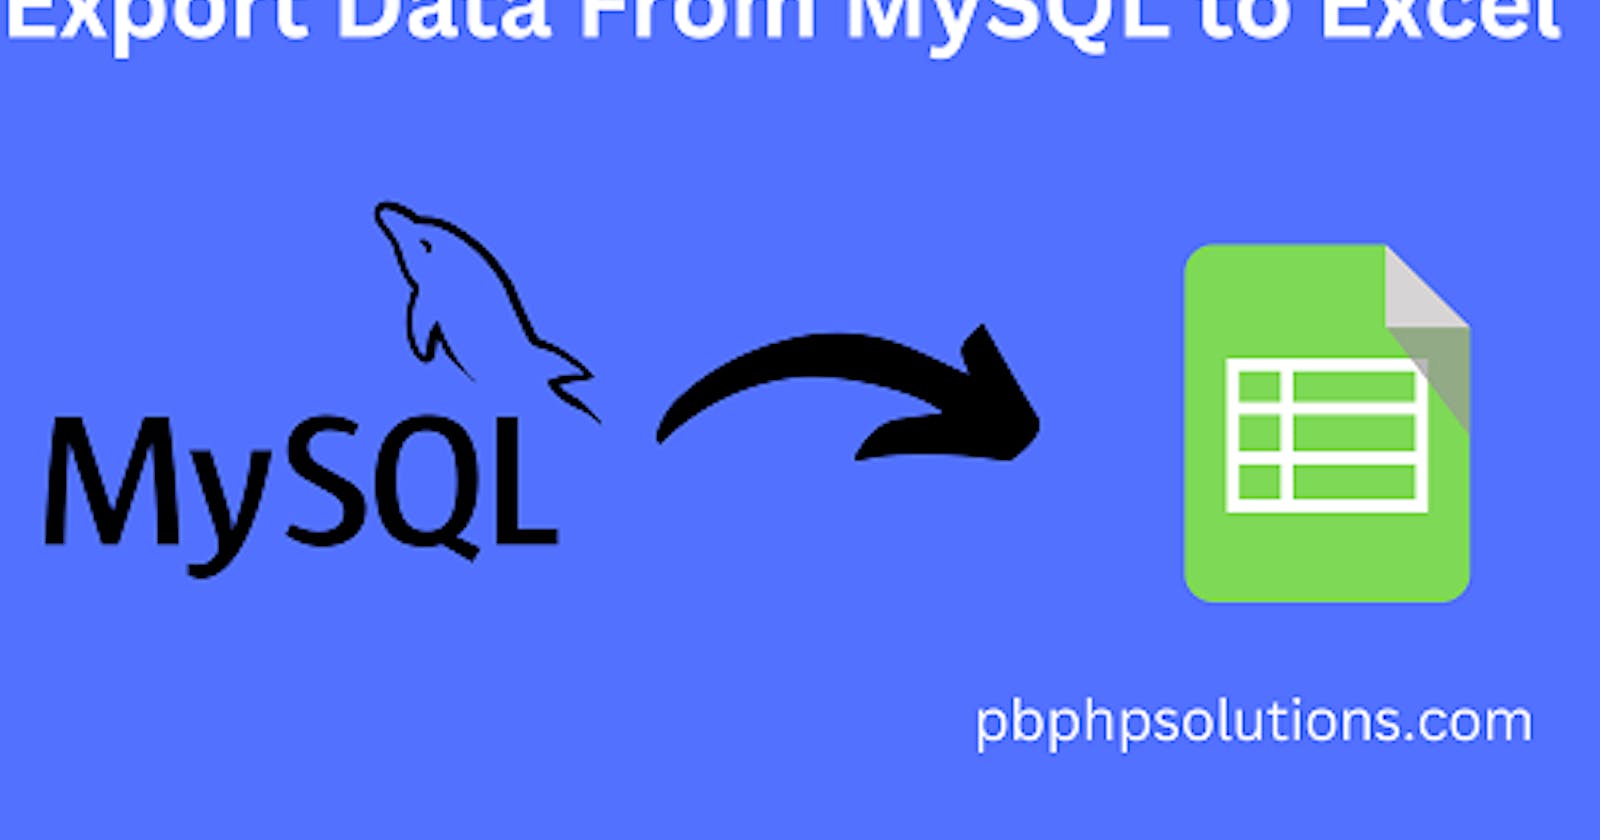 Export Data From MySQL to Excel Using PHP